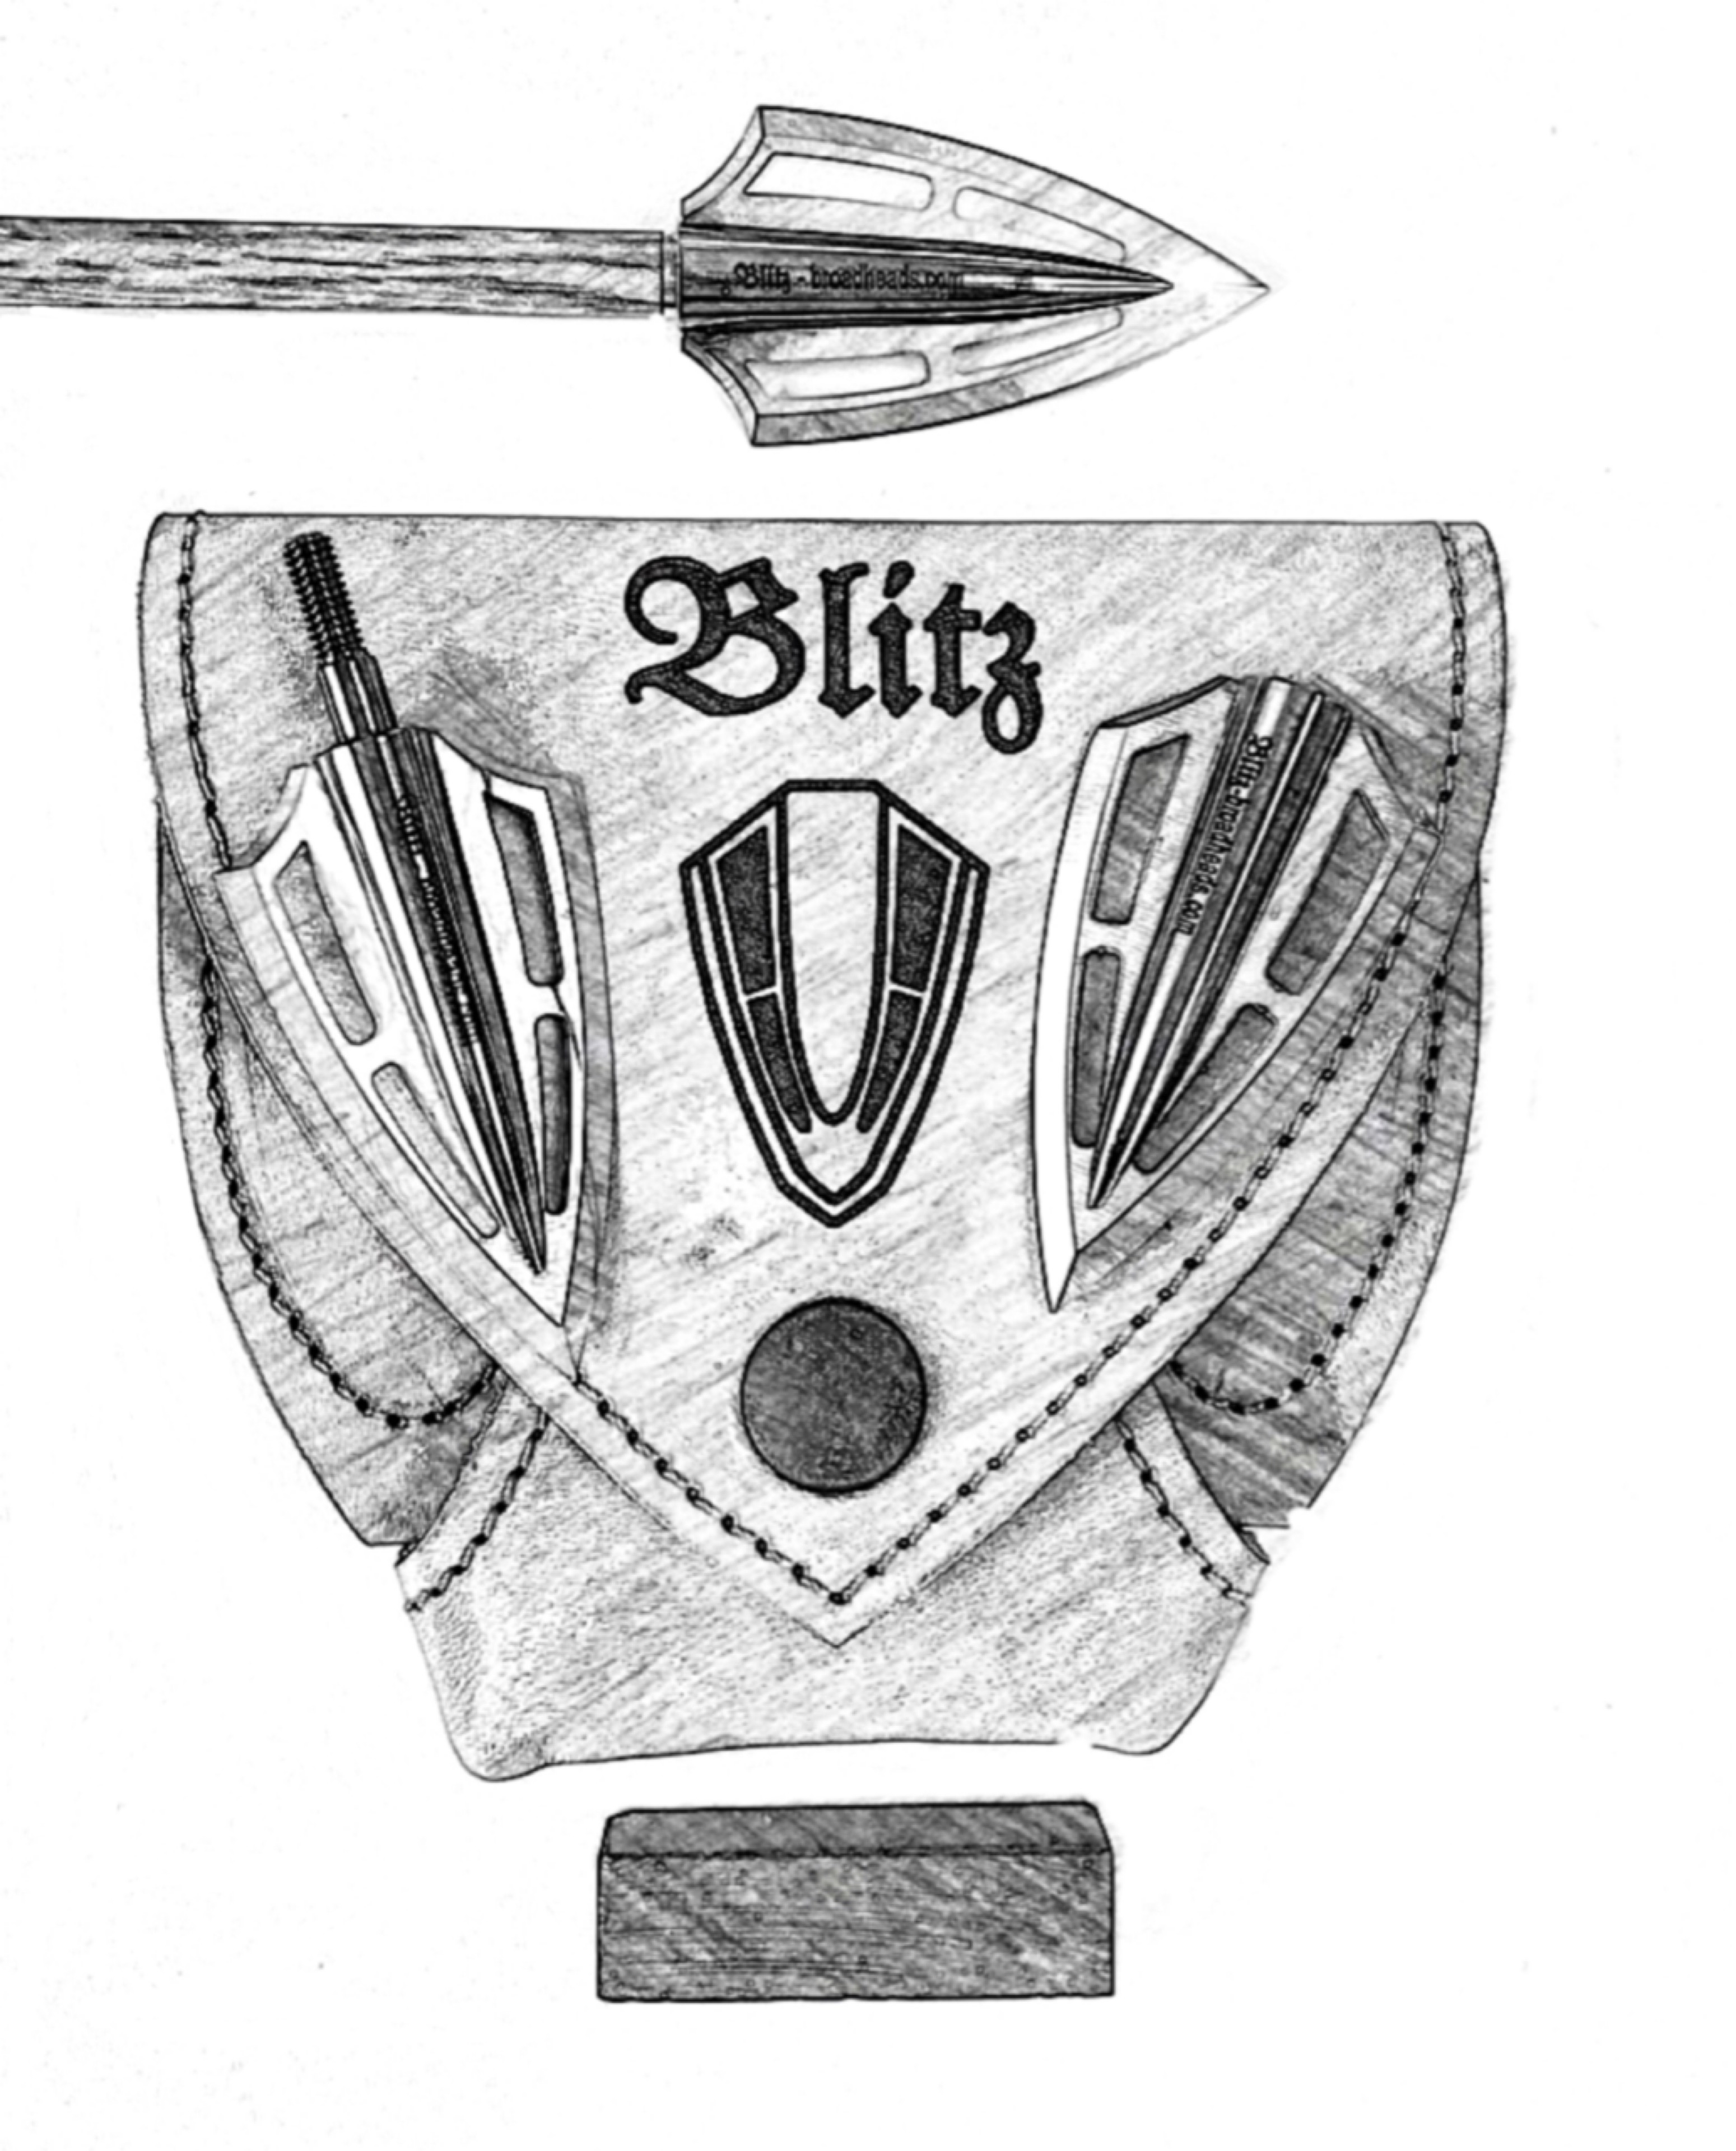 Blitz-Broadhead pouch with content, closed